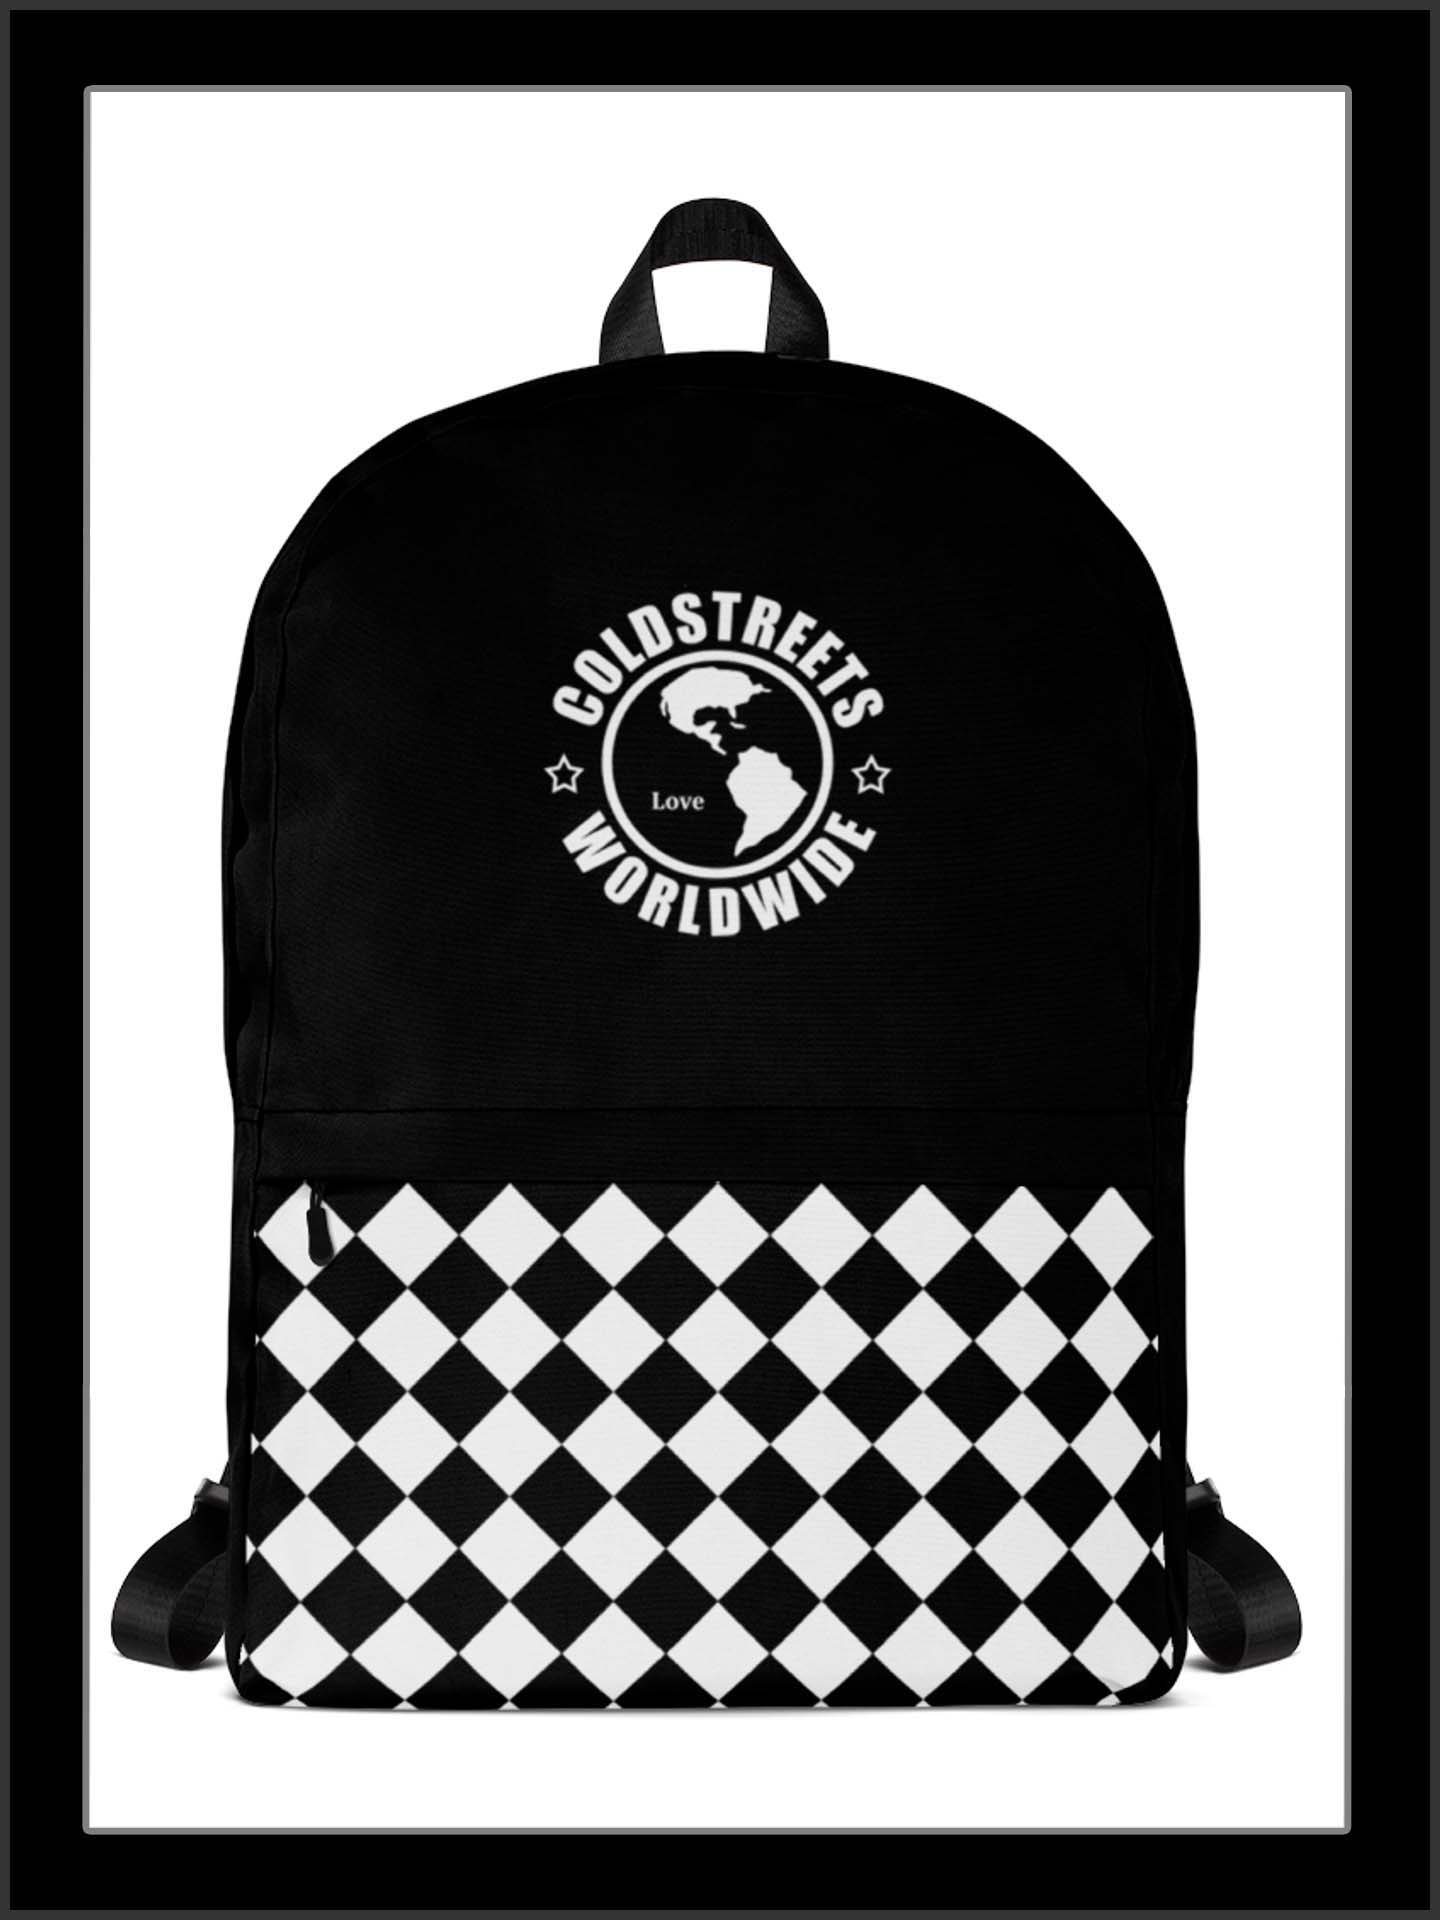 Cold Streets Illinois Backpacks